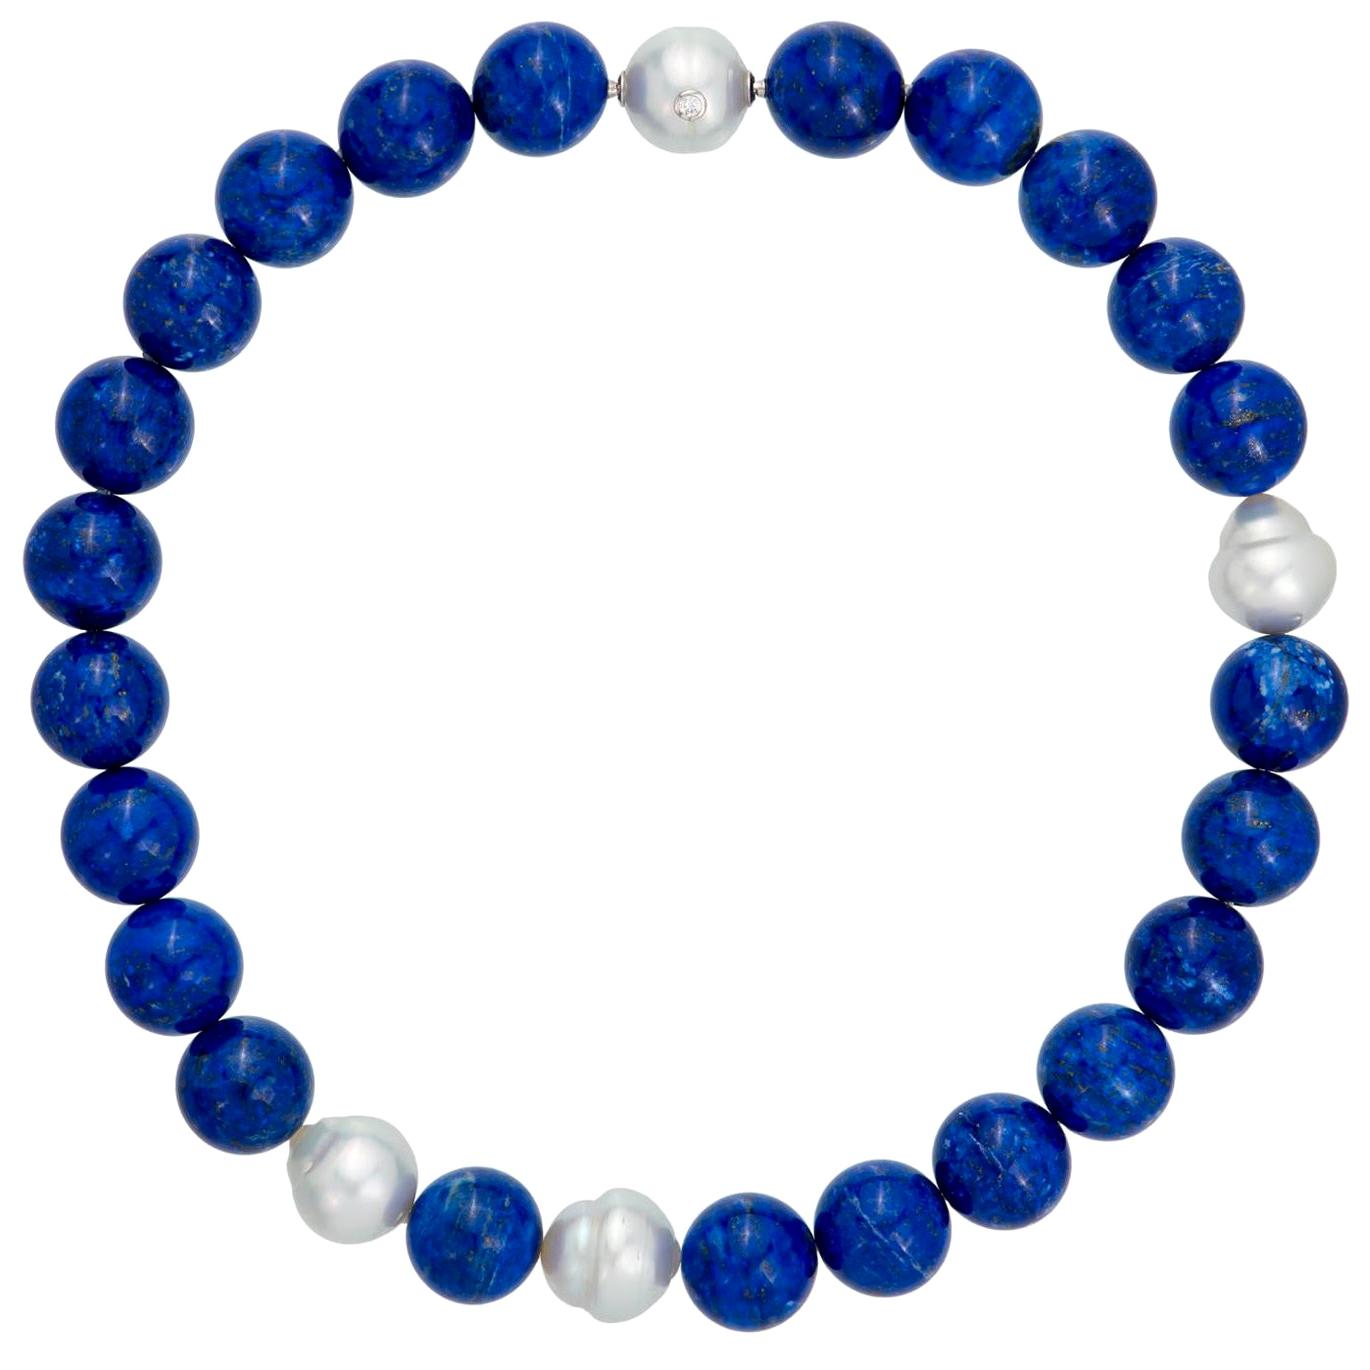 Margot McKinney 18k Gold South Sea Pearl & Lapis Necklet, Diamond in Pearl Clasp For Sale